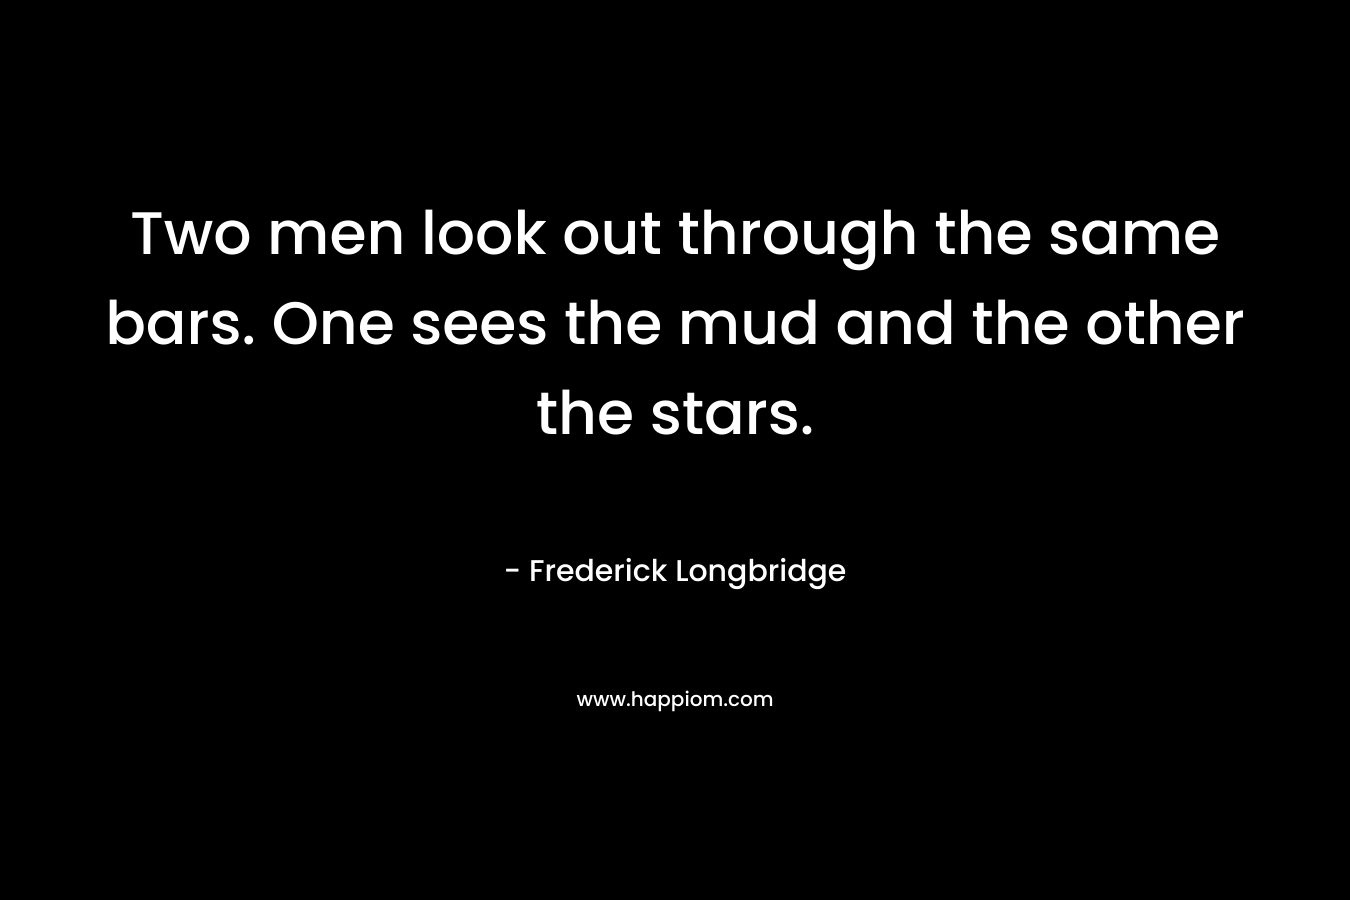 Two men look out through the same bars. One sees the mud and the other the stars. – Frederick Longbridge